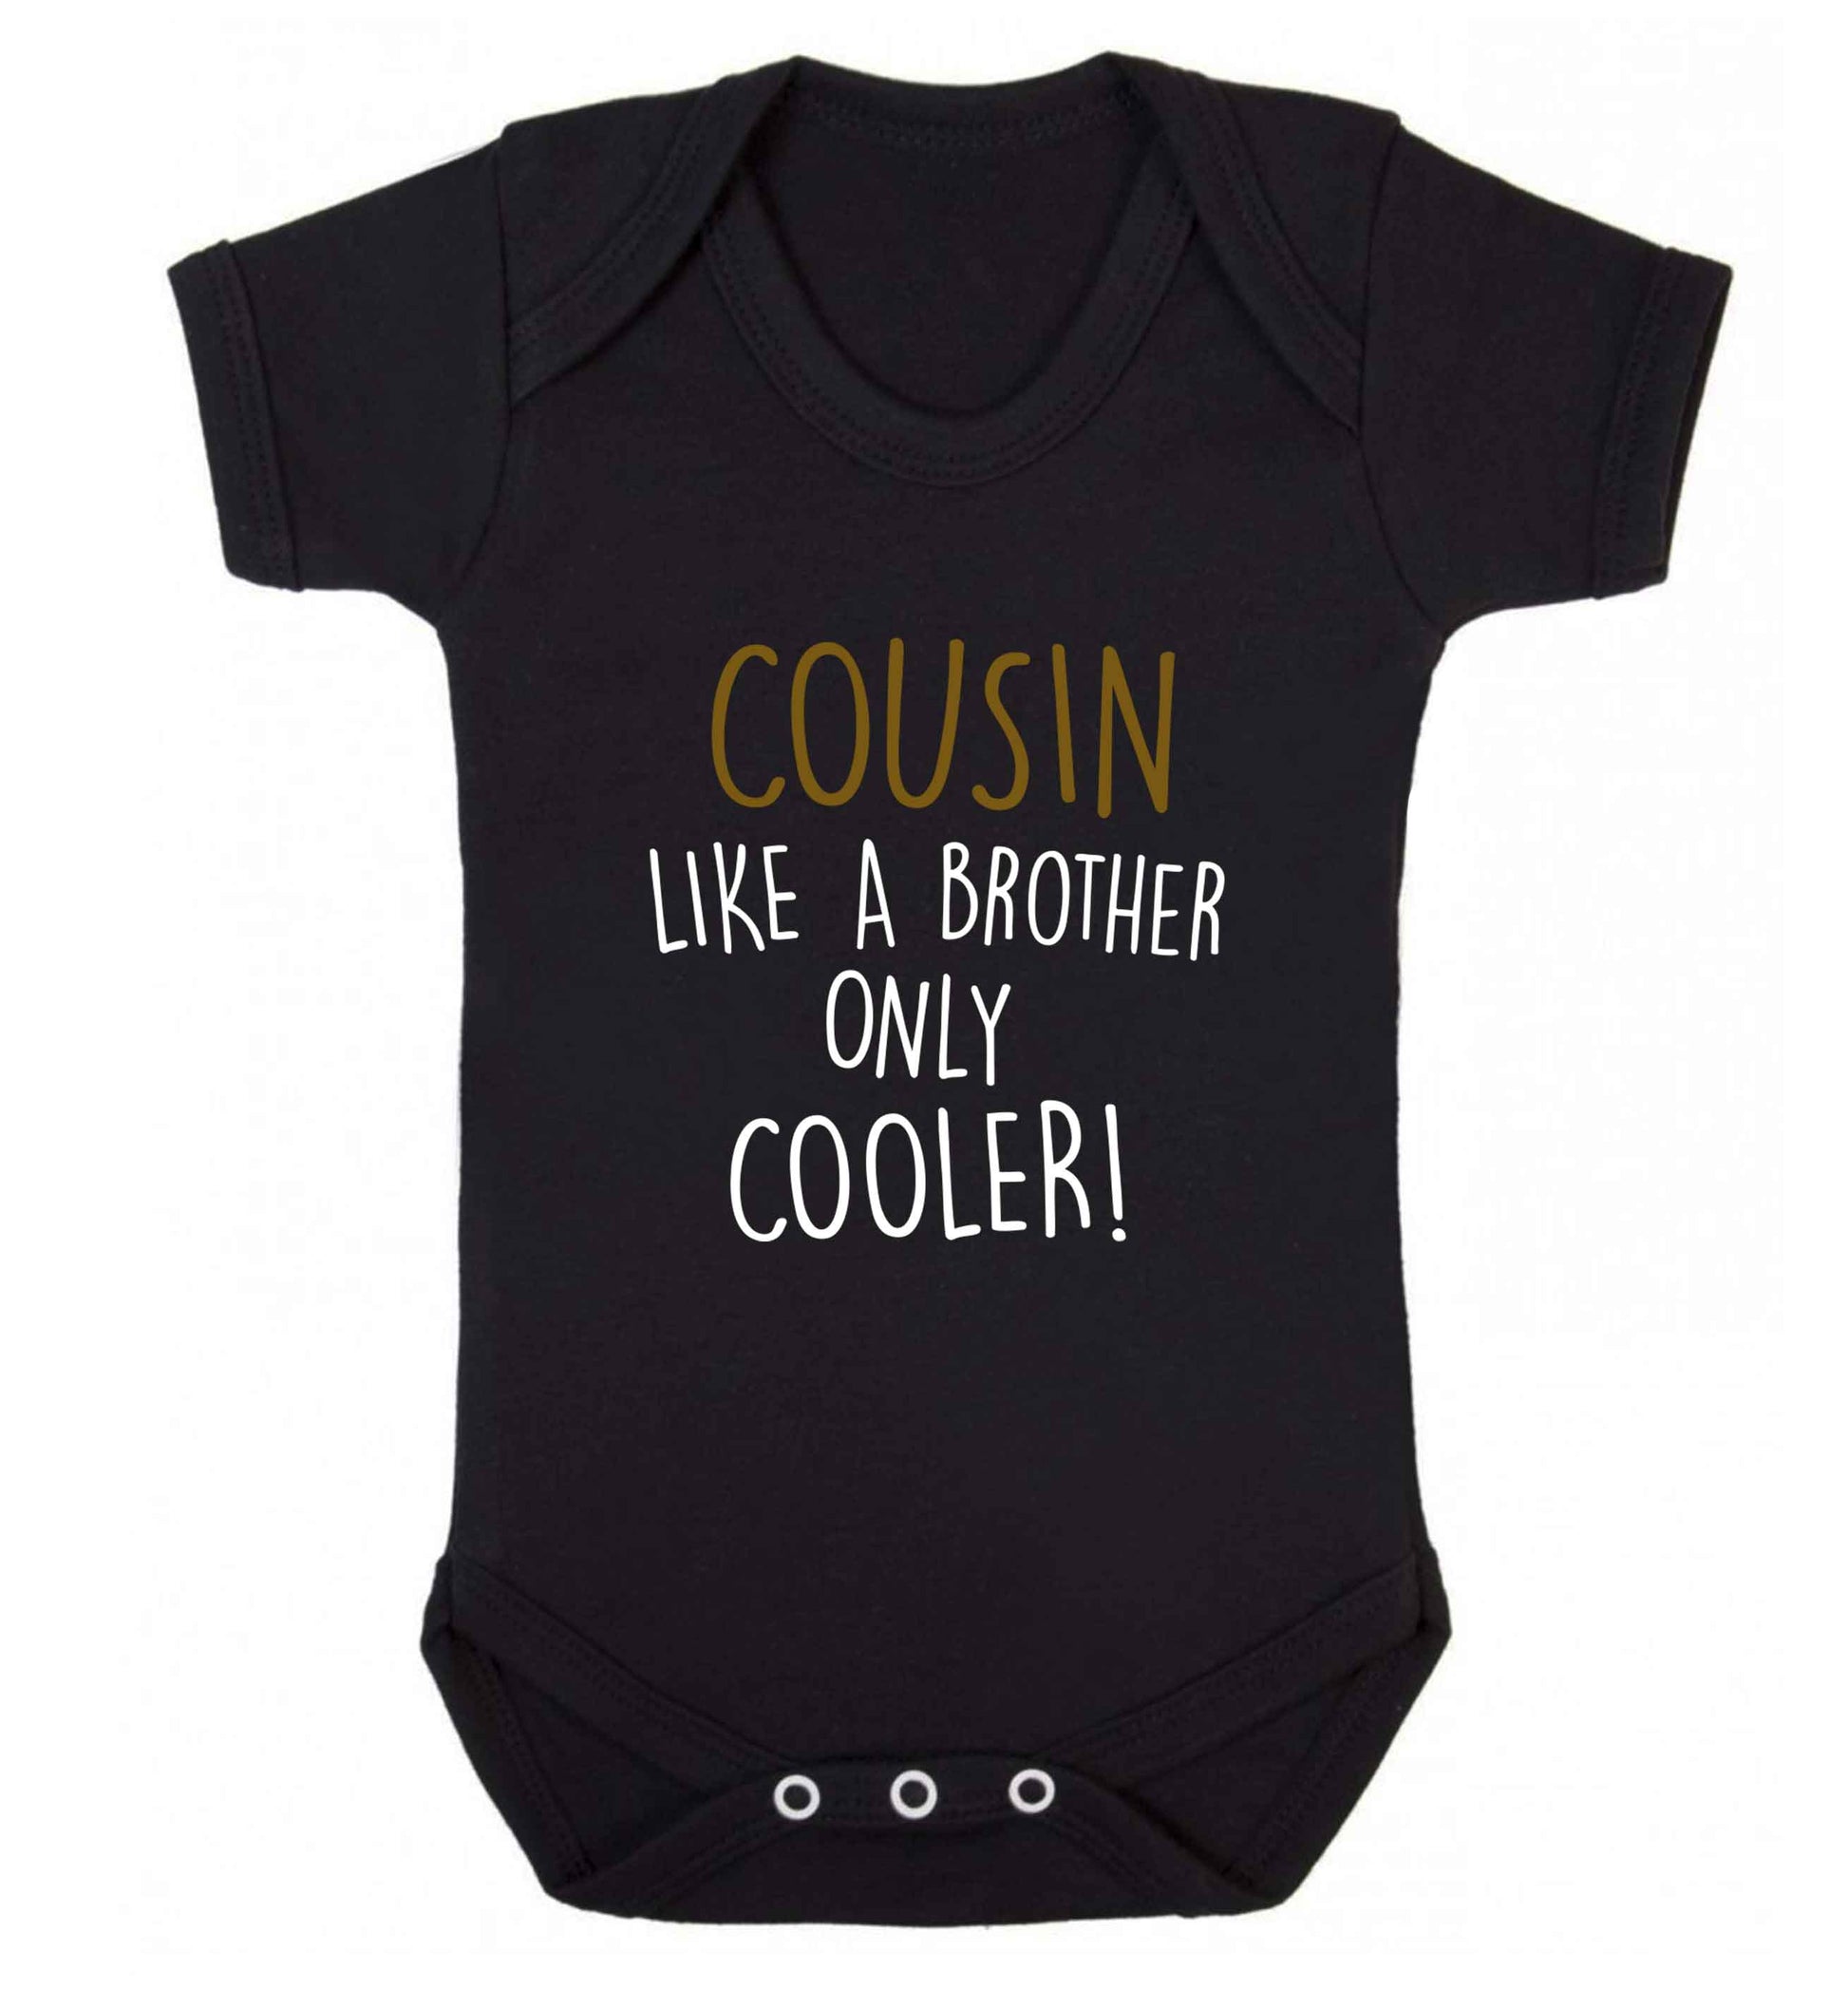 Cousin like a brother only cooler baby vest black 18-24 months